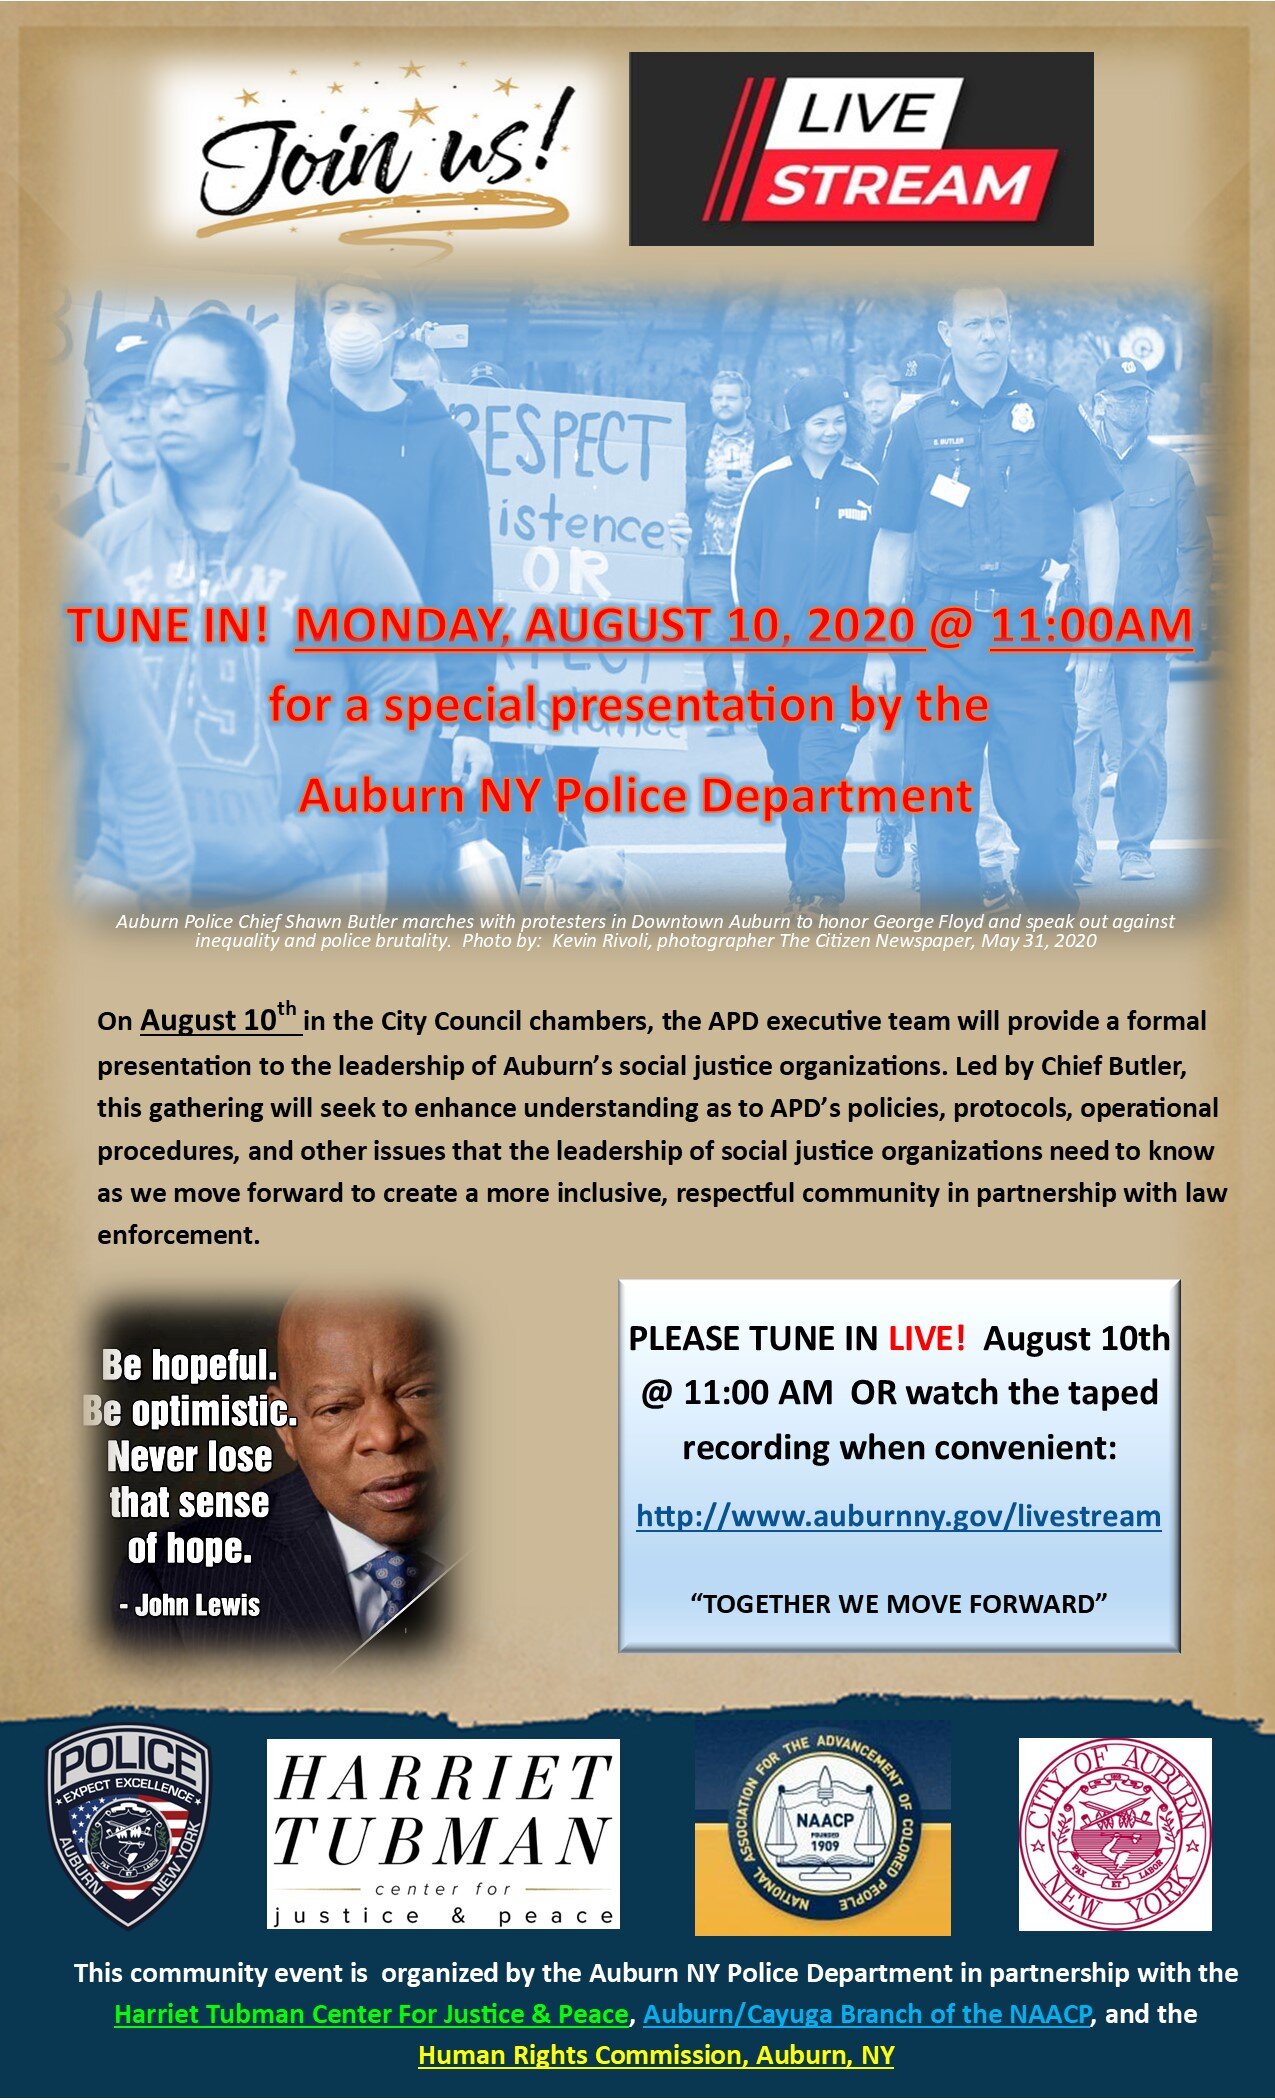 City of Auburn NY — News — HARRIET TUBMAN CENTER FOR JUSTICE & PEACE, INC.